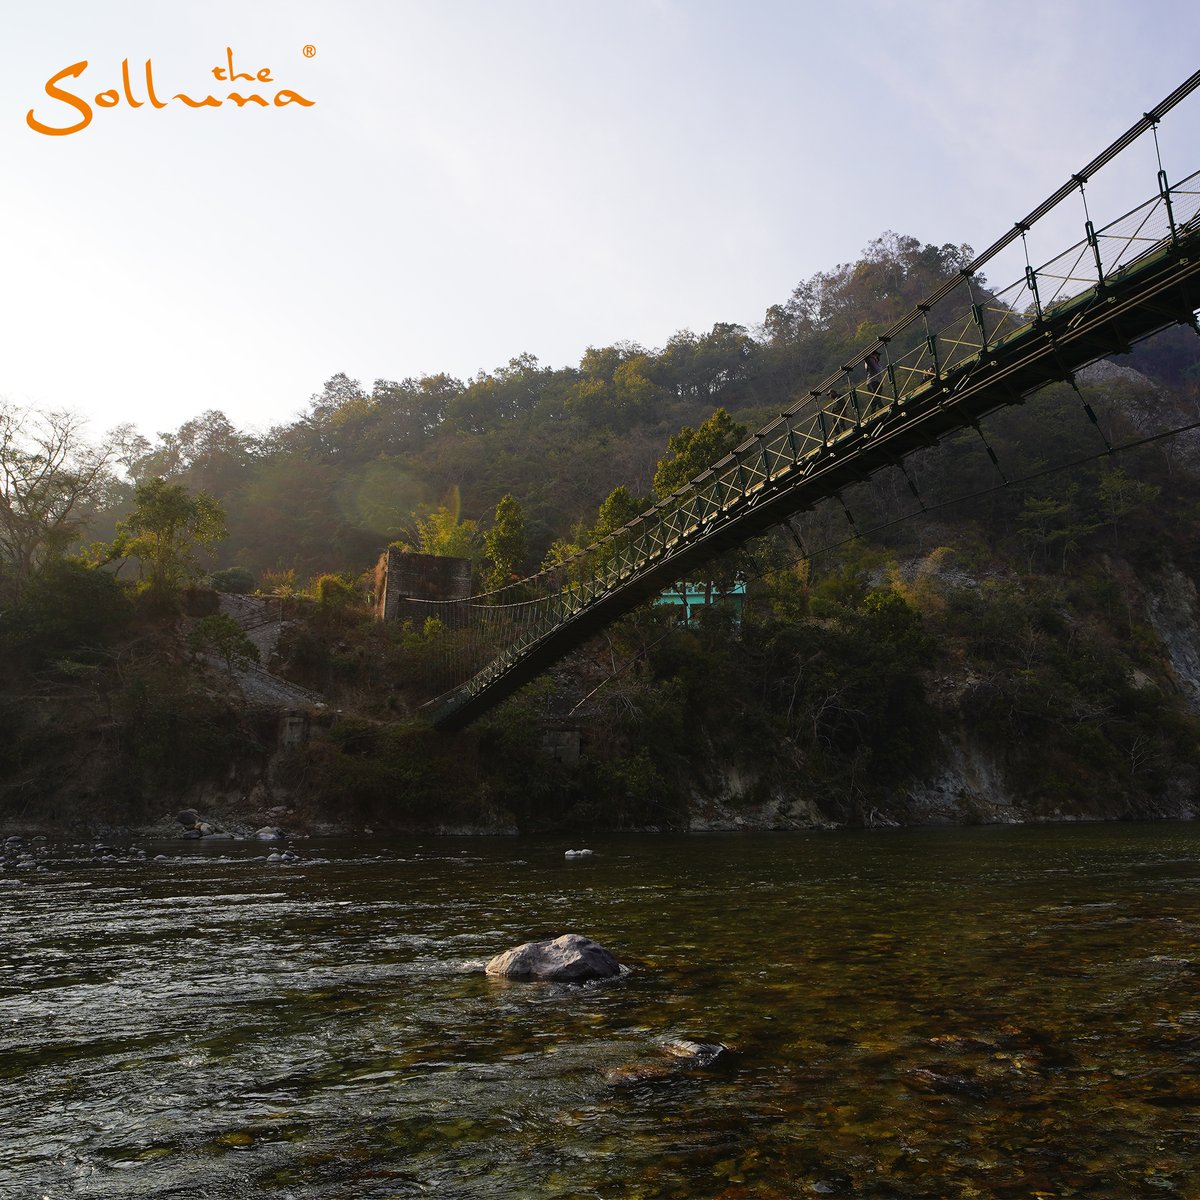 Imagine sitting by a peaceful river, the soothing sounds of water blending with the serene beauty of Jim Corbett 🌊🍃.
At @sollunaresort we bring you closer to this calming experience.
.
.
.
.
.
.
#thesollunaresort #marchula #river #nature #jimcorbett #jimcorbettnationalpark